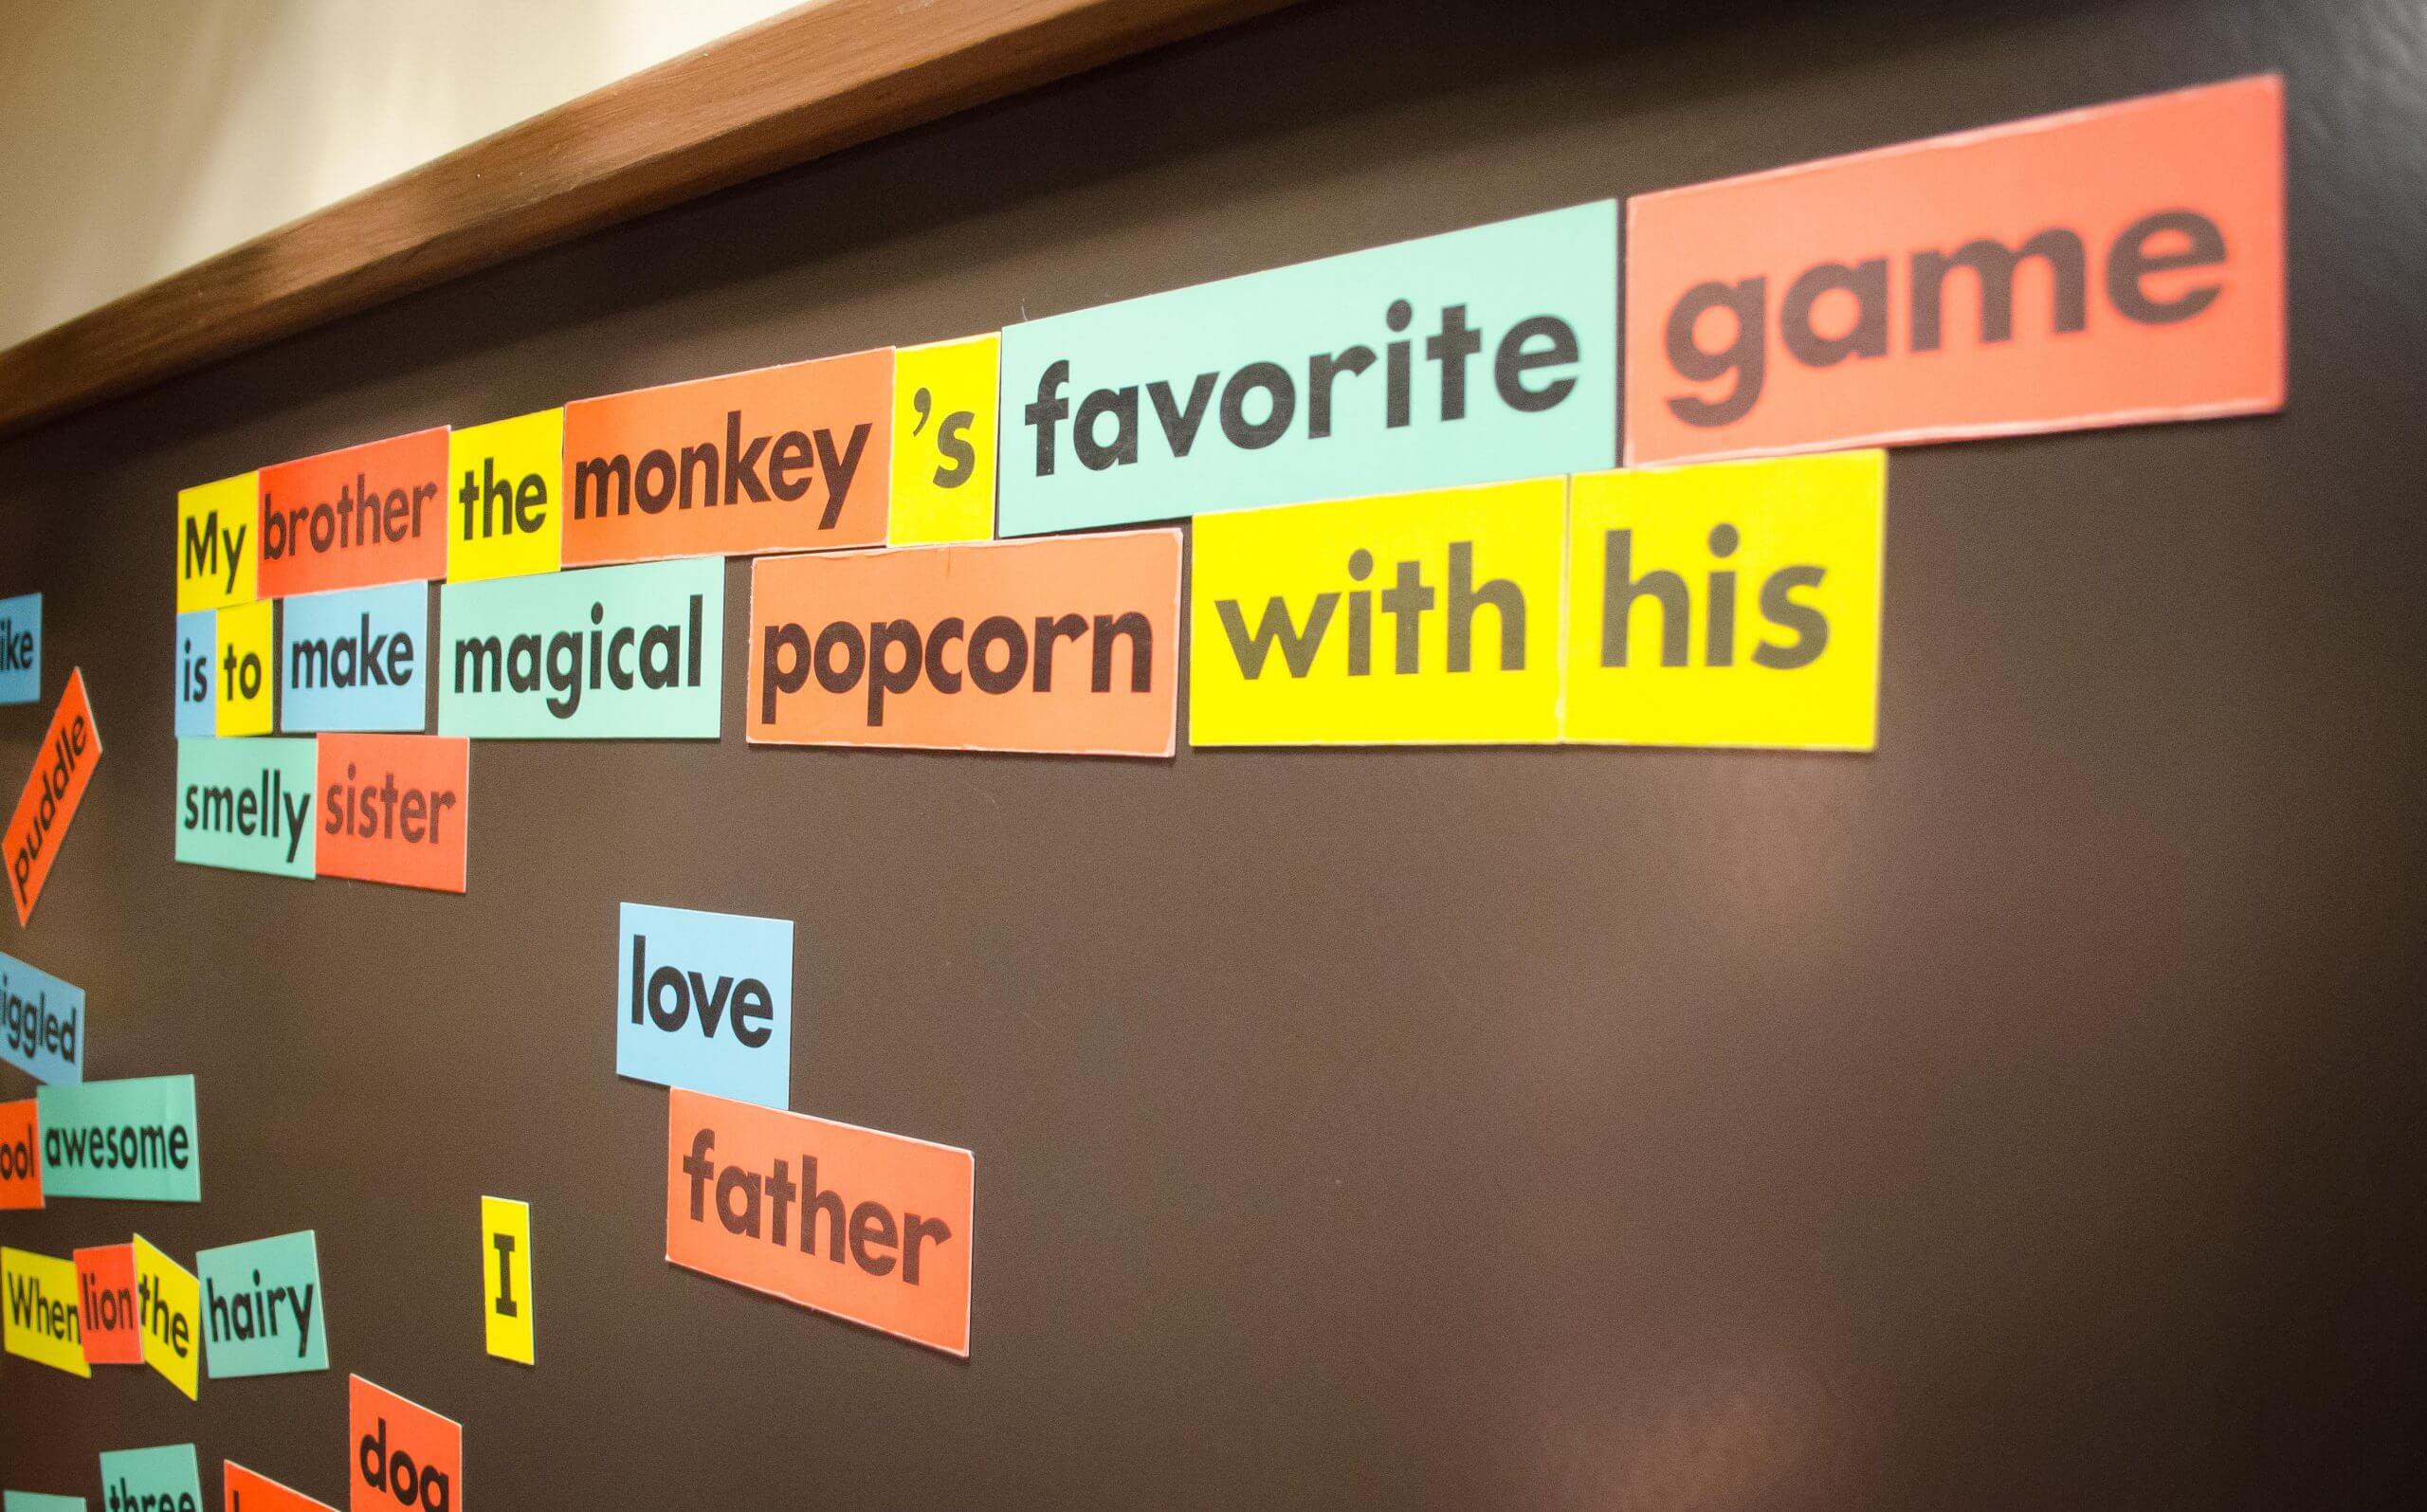 Magnetic words are placed on a board. The words read "My brother the monkey's favorite game is to make magical popcorn with his smelly sister."